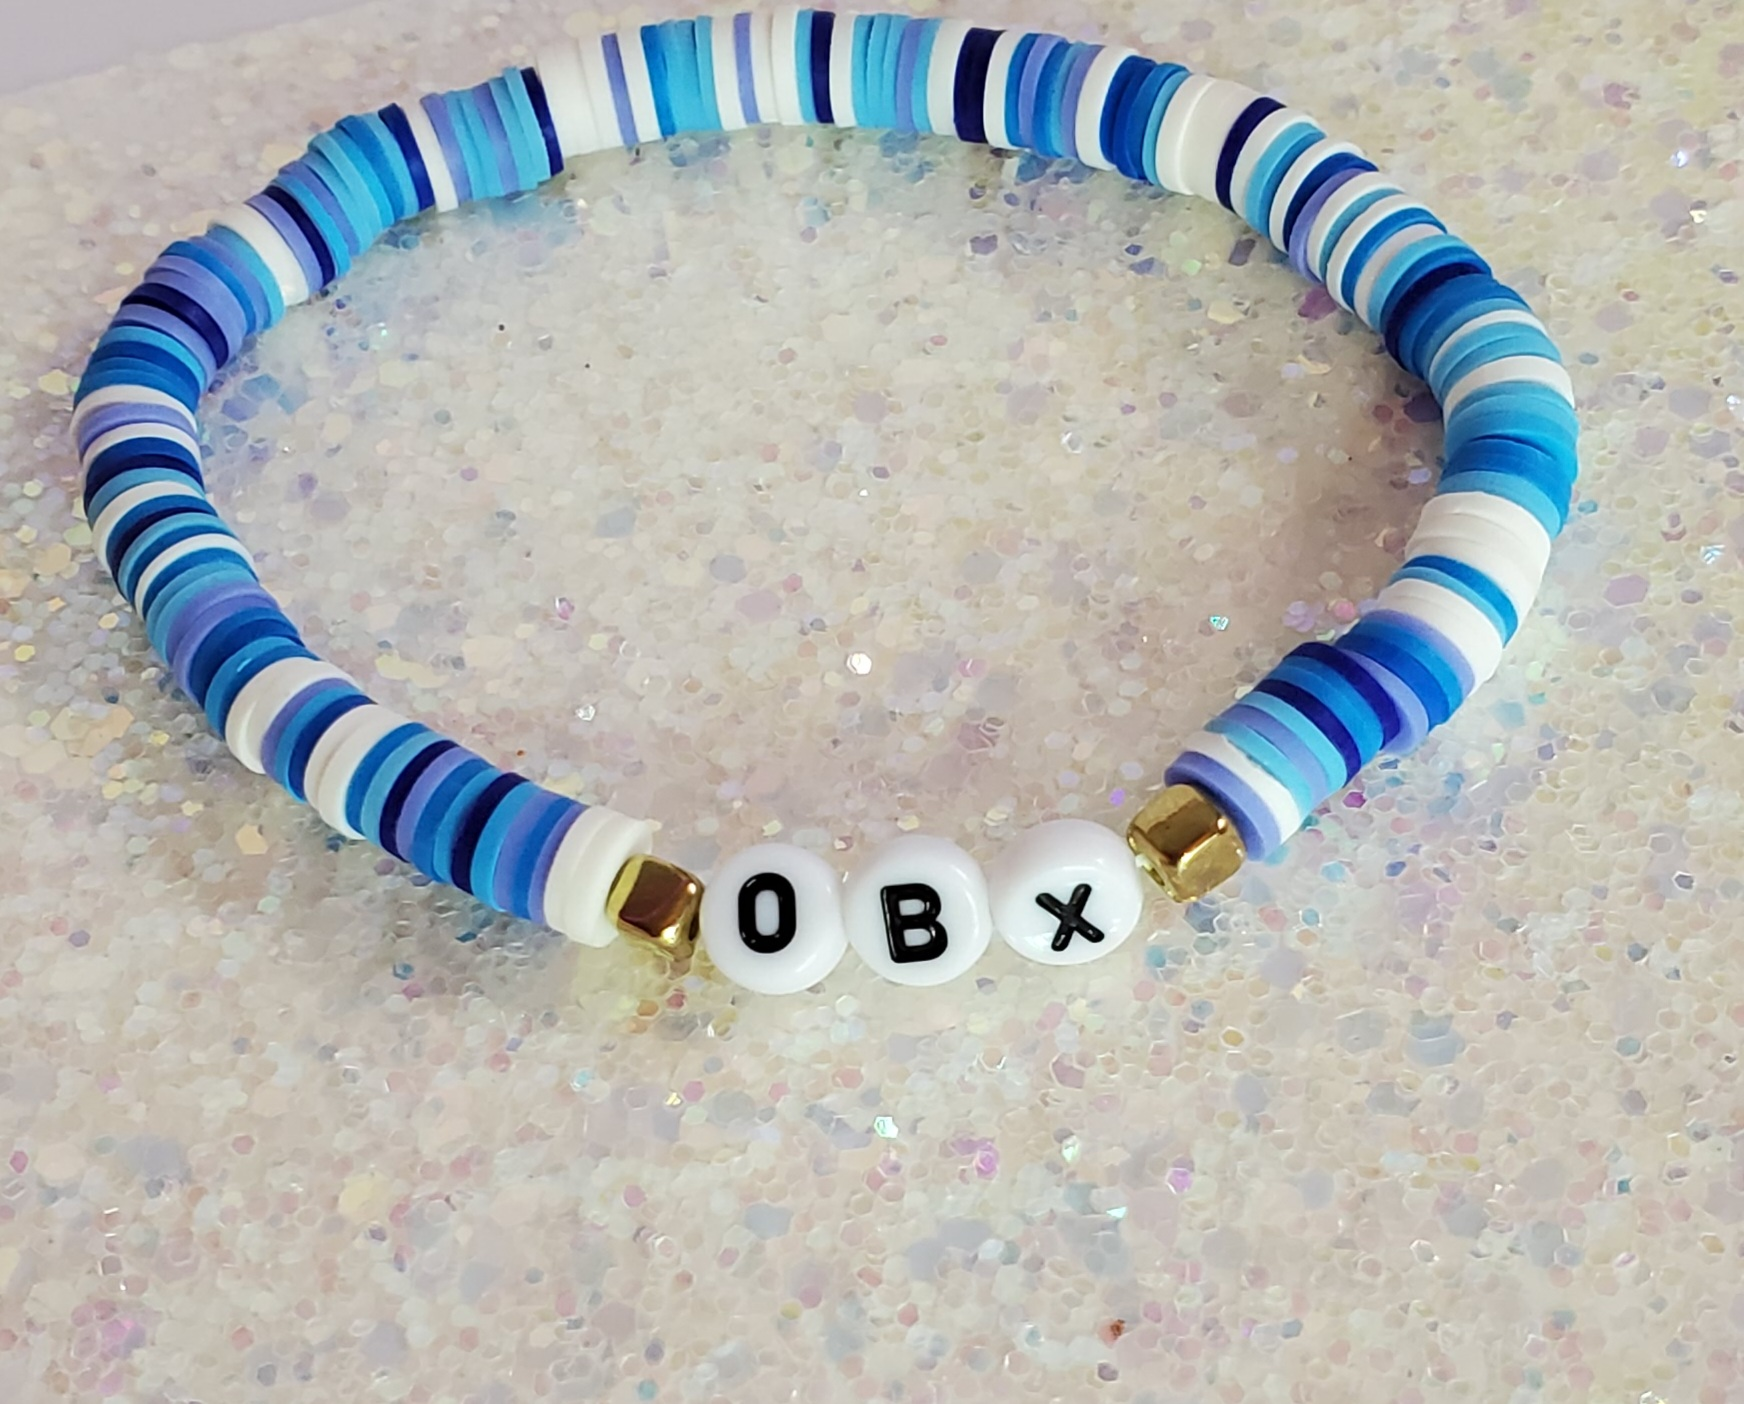 Accessories, Simple Blue And Black Bracelet Clay Beads